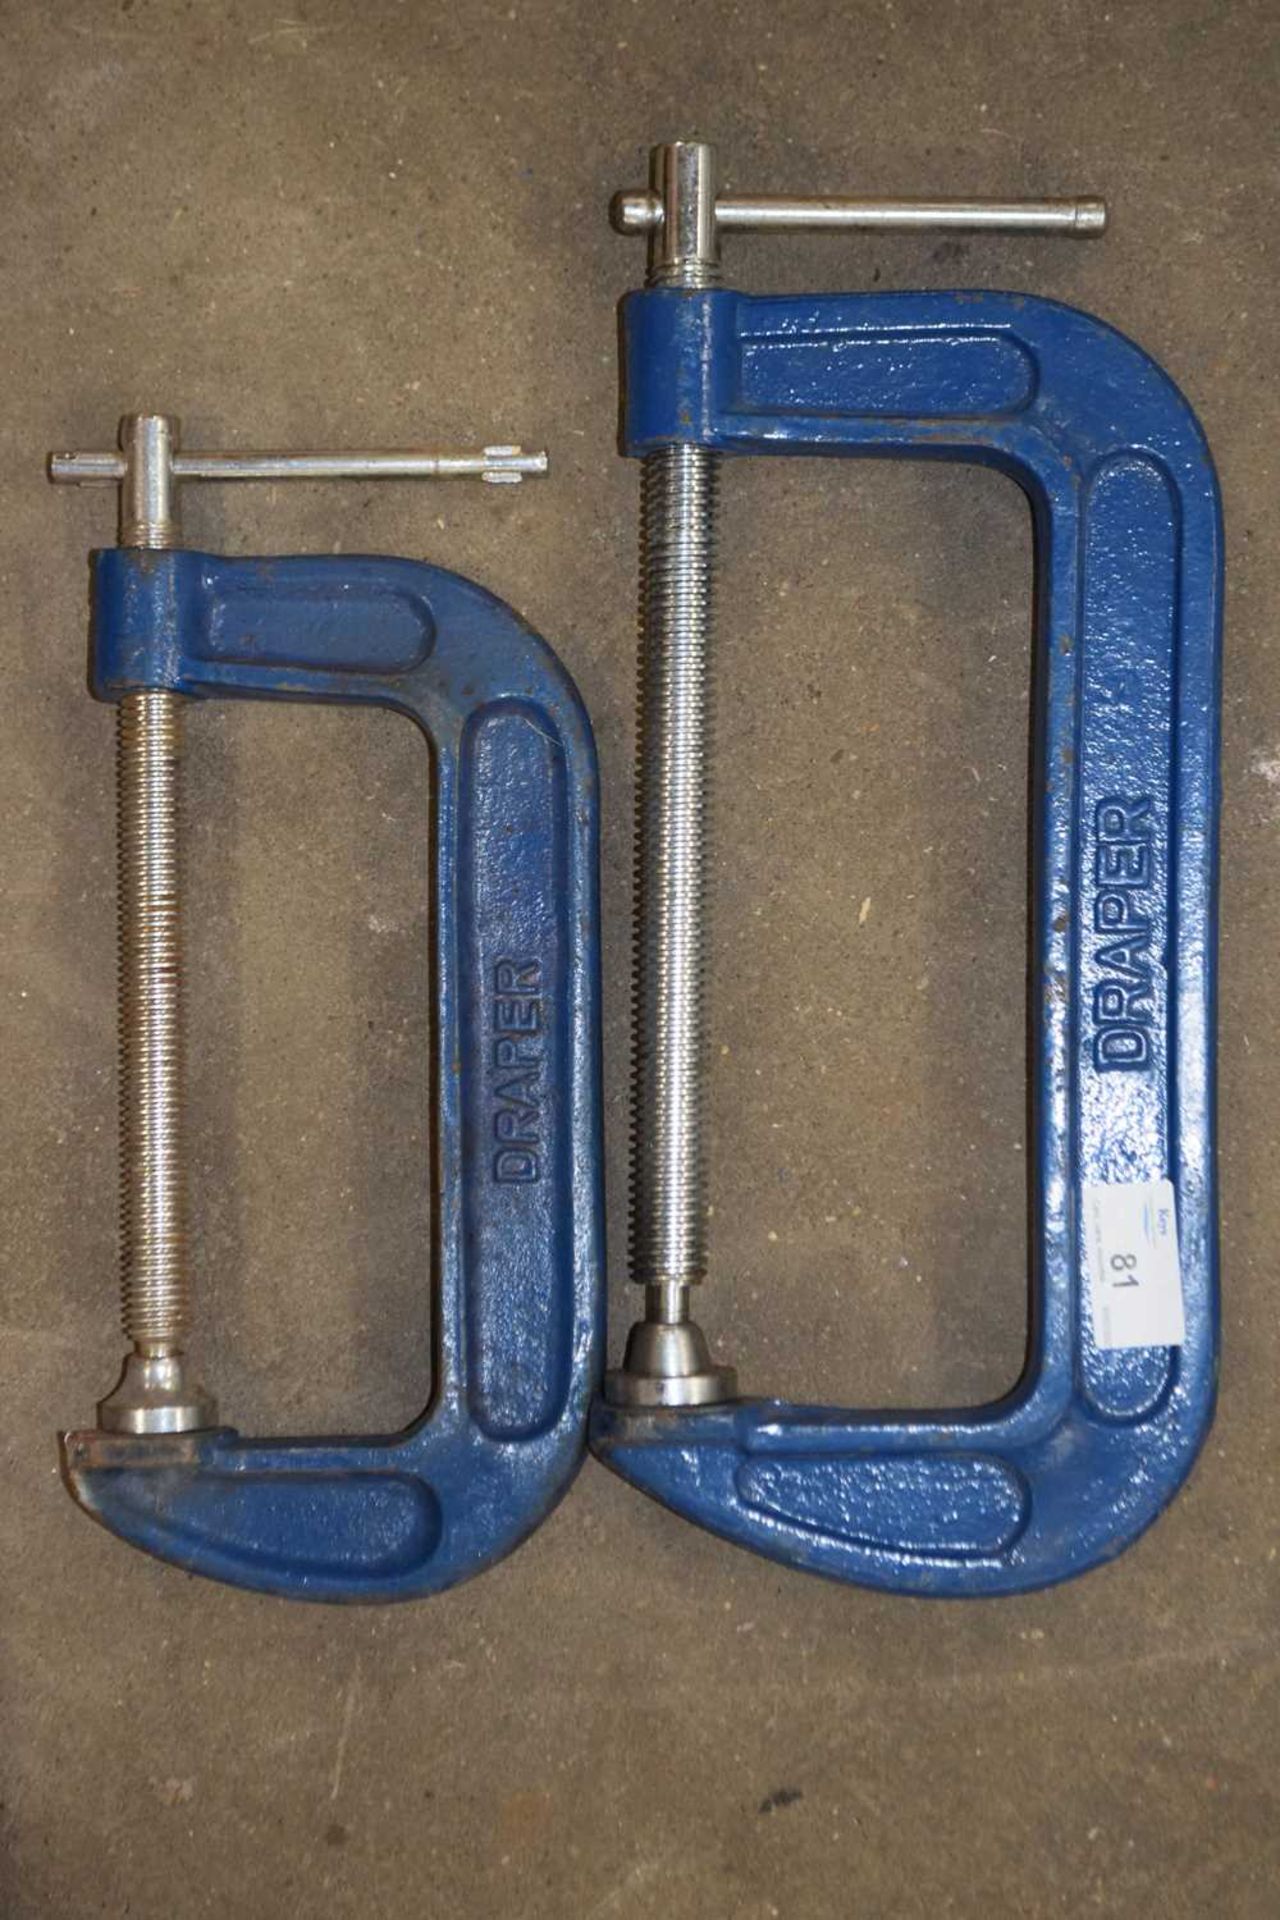 Two Draper G clamps